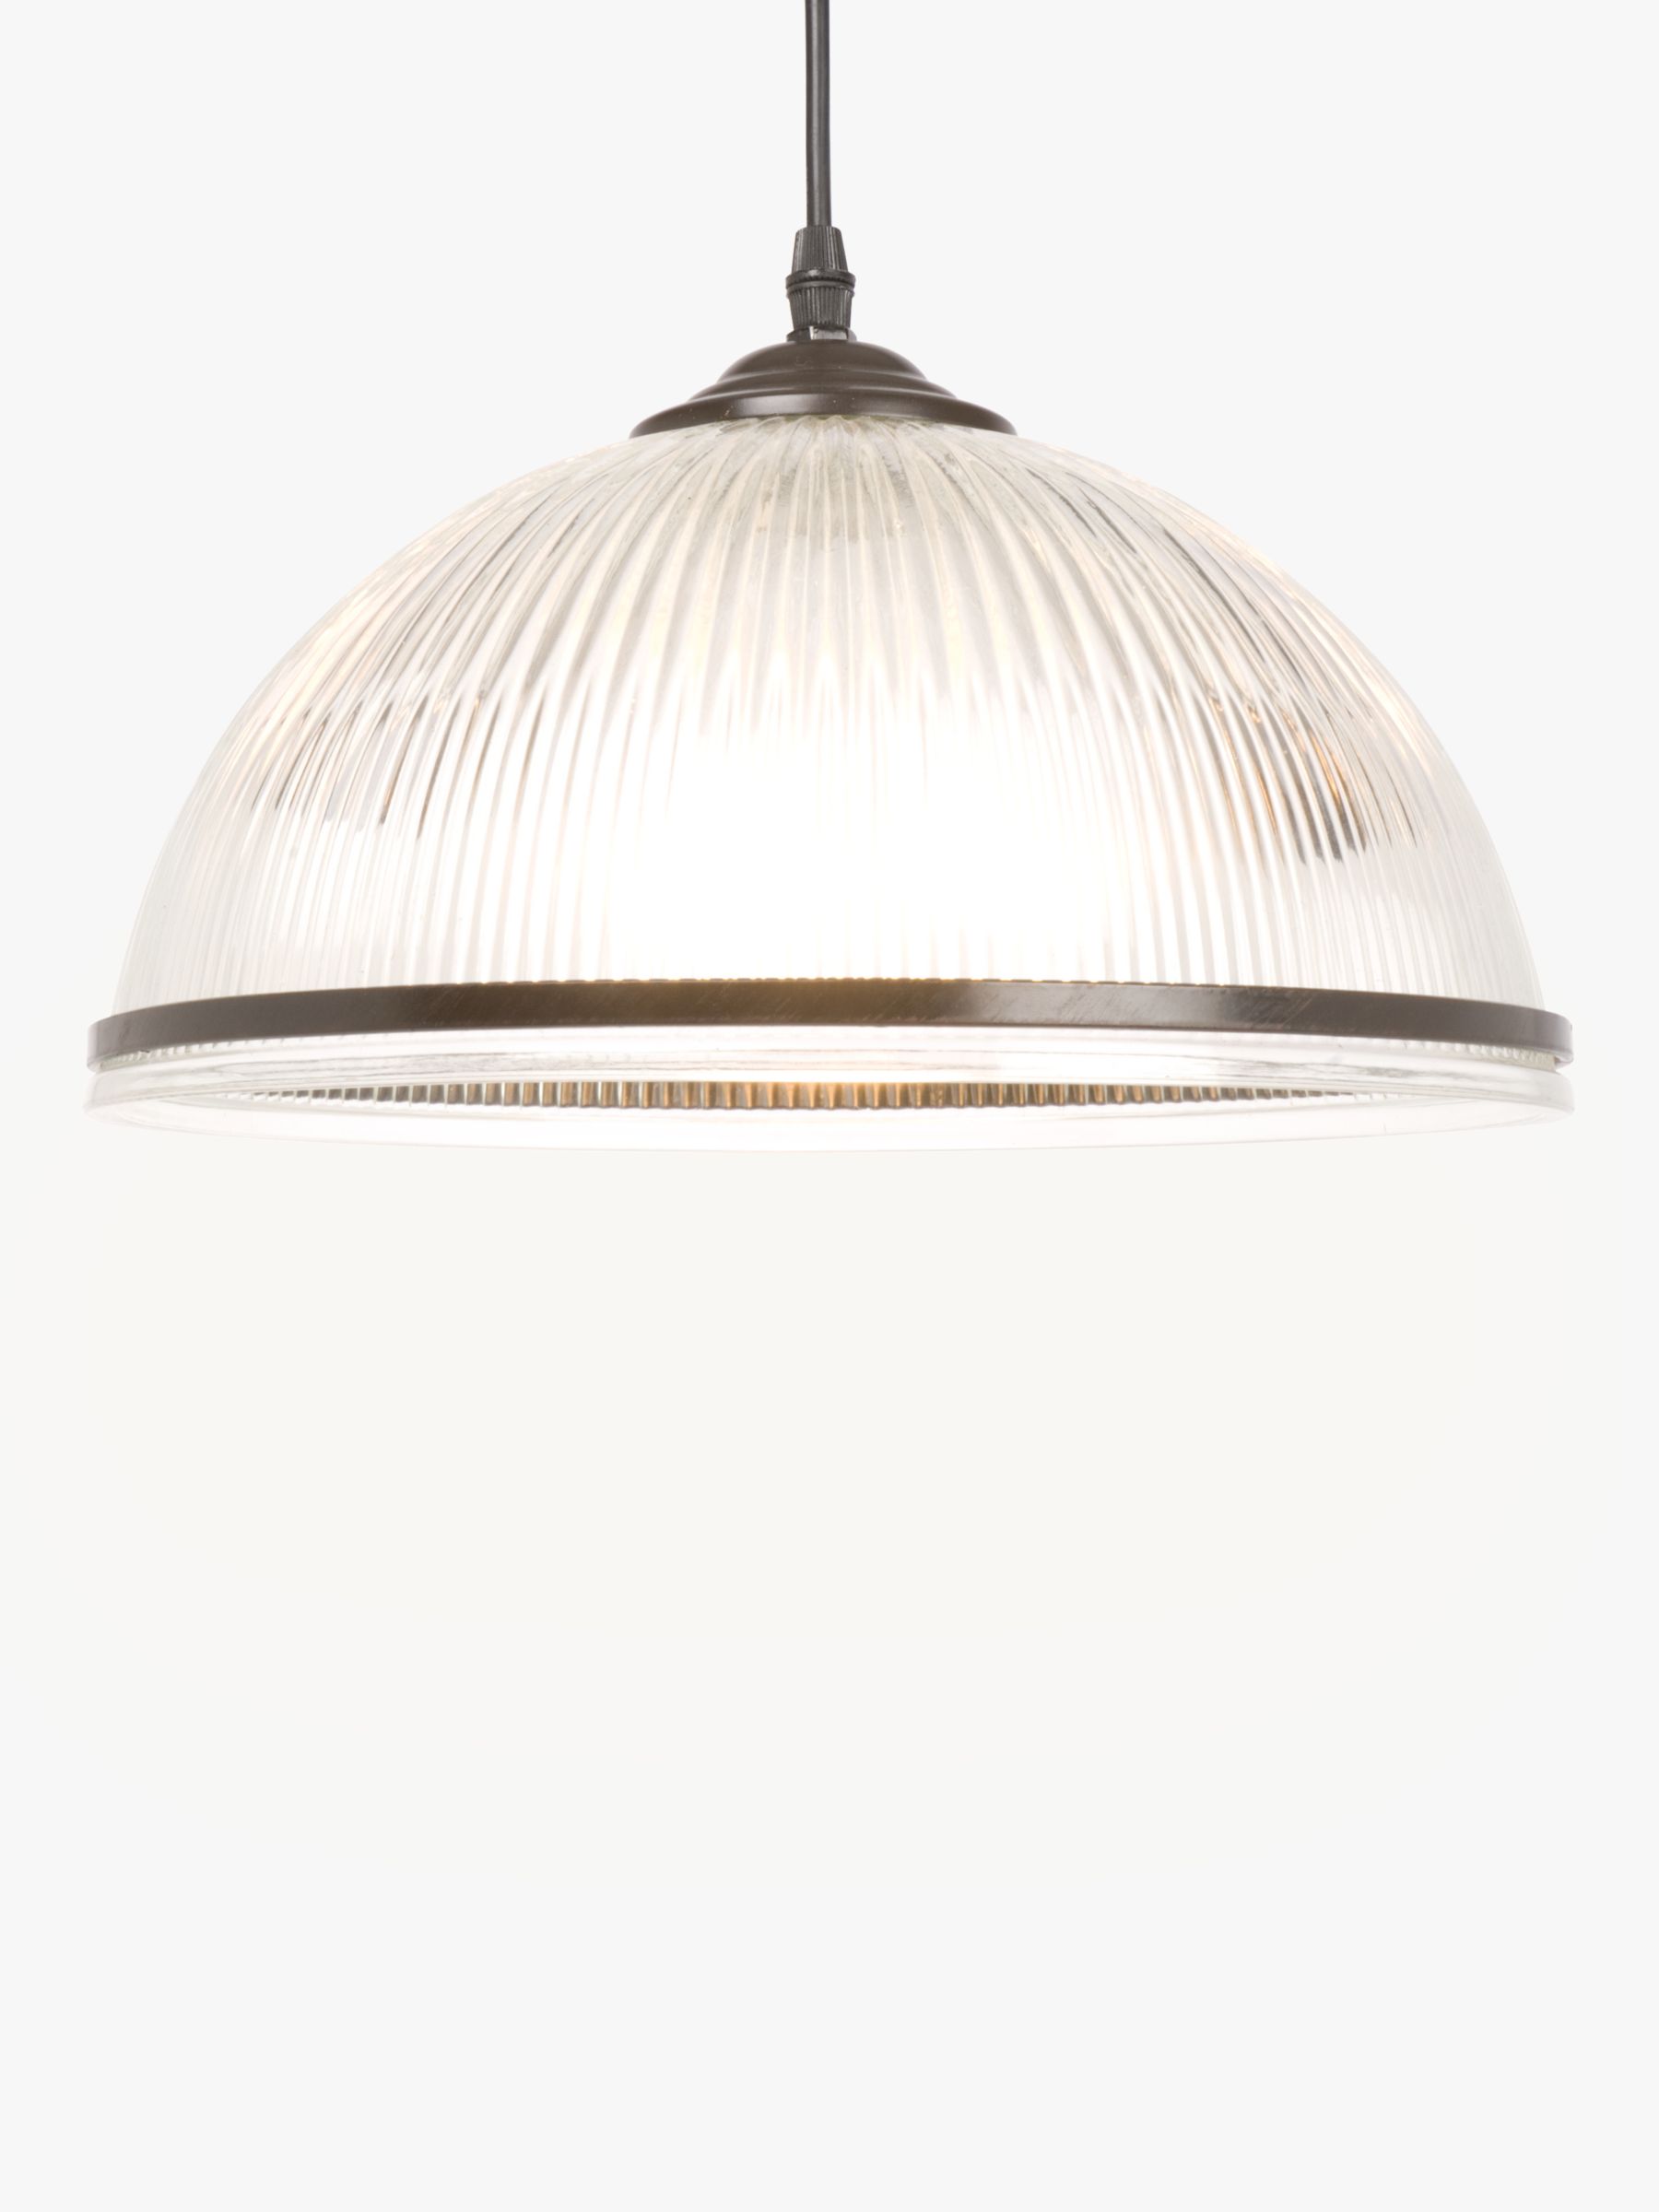 Croft Collection Tristan Ceiling Light At John Lewis Partners